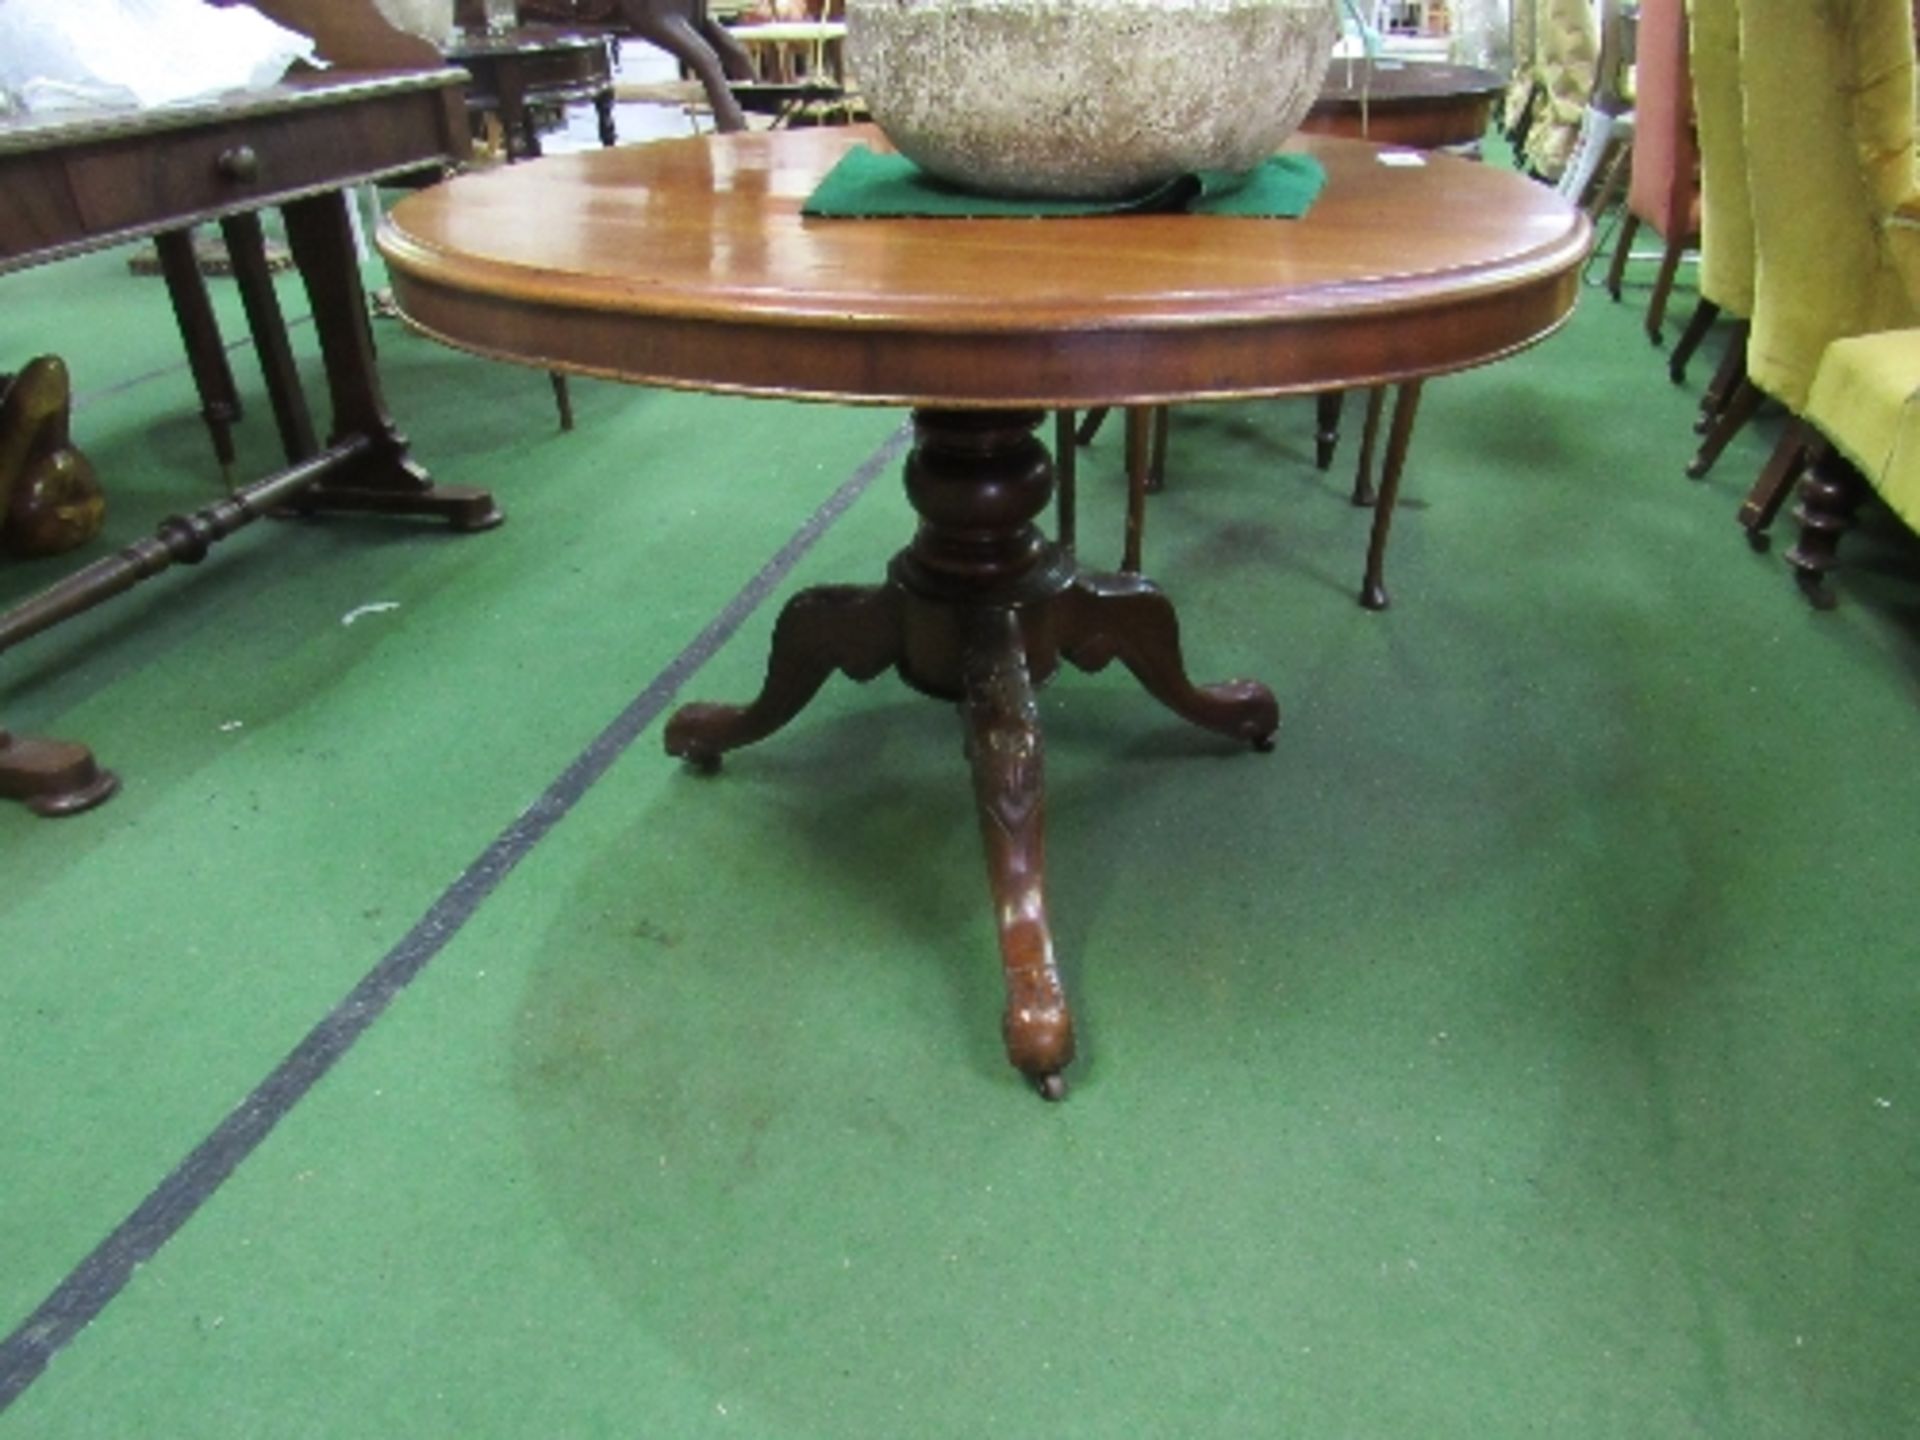 Mahogany circular tilt-top table on ornate pedestal to 3 legs on casters, 40" diameter x 28" high